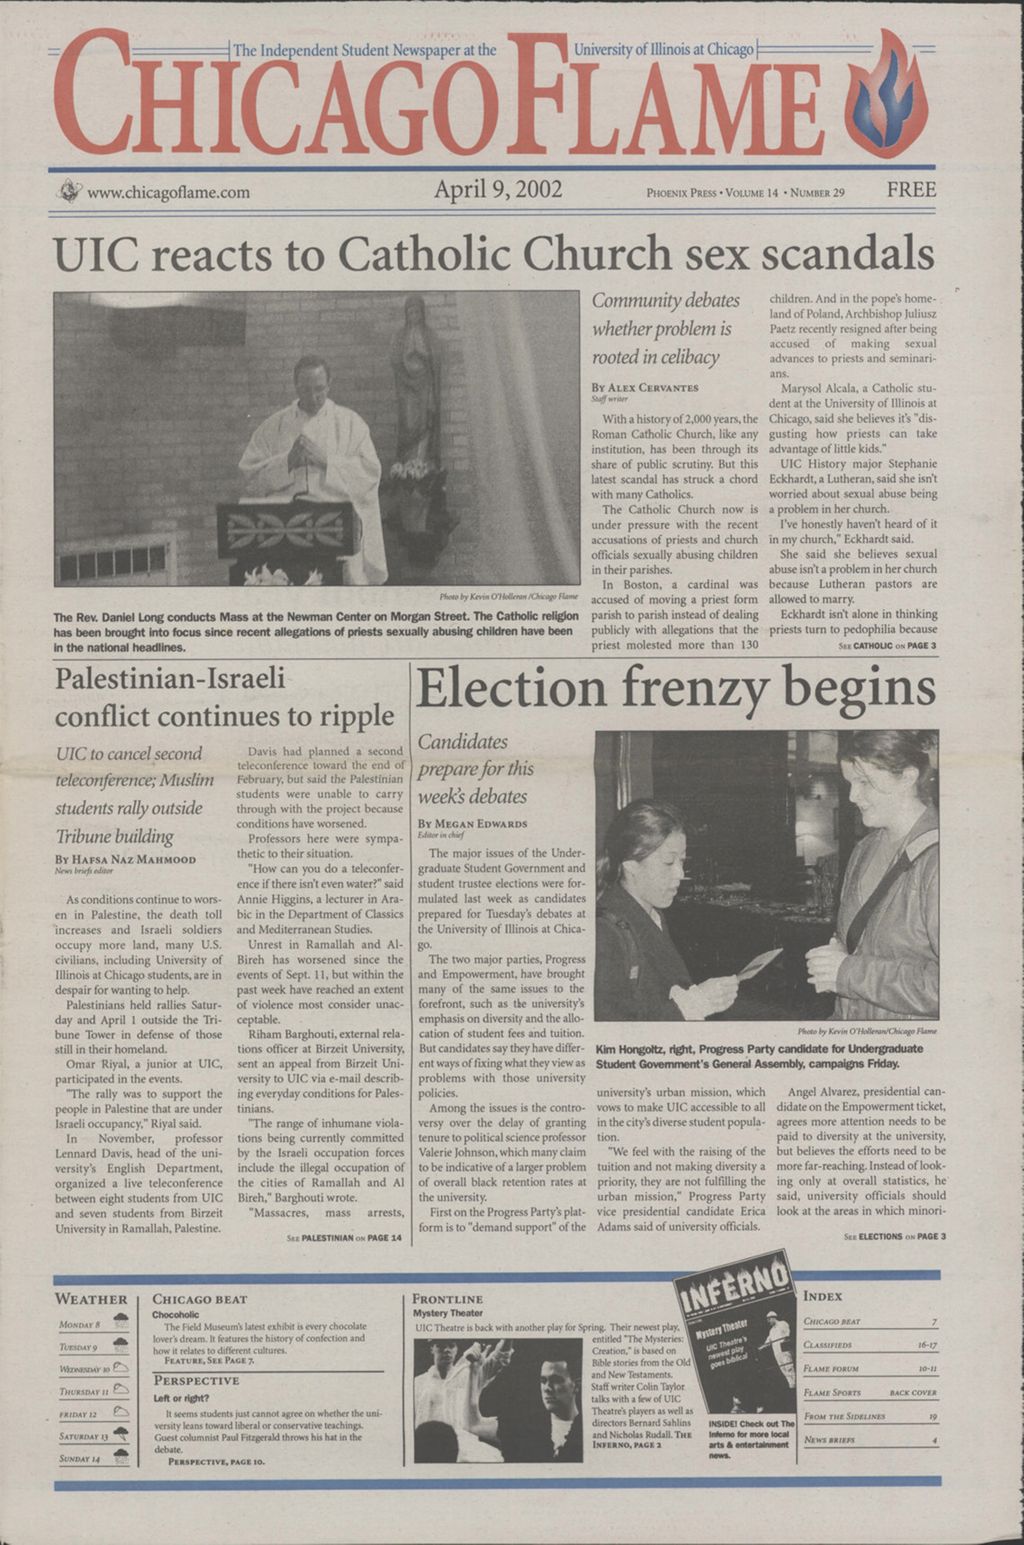 Chicago Flame (April 9, 2002)